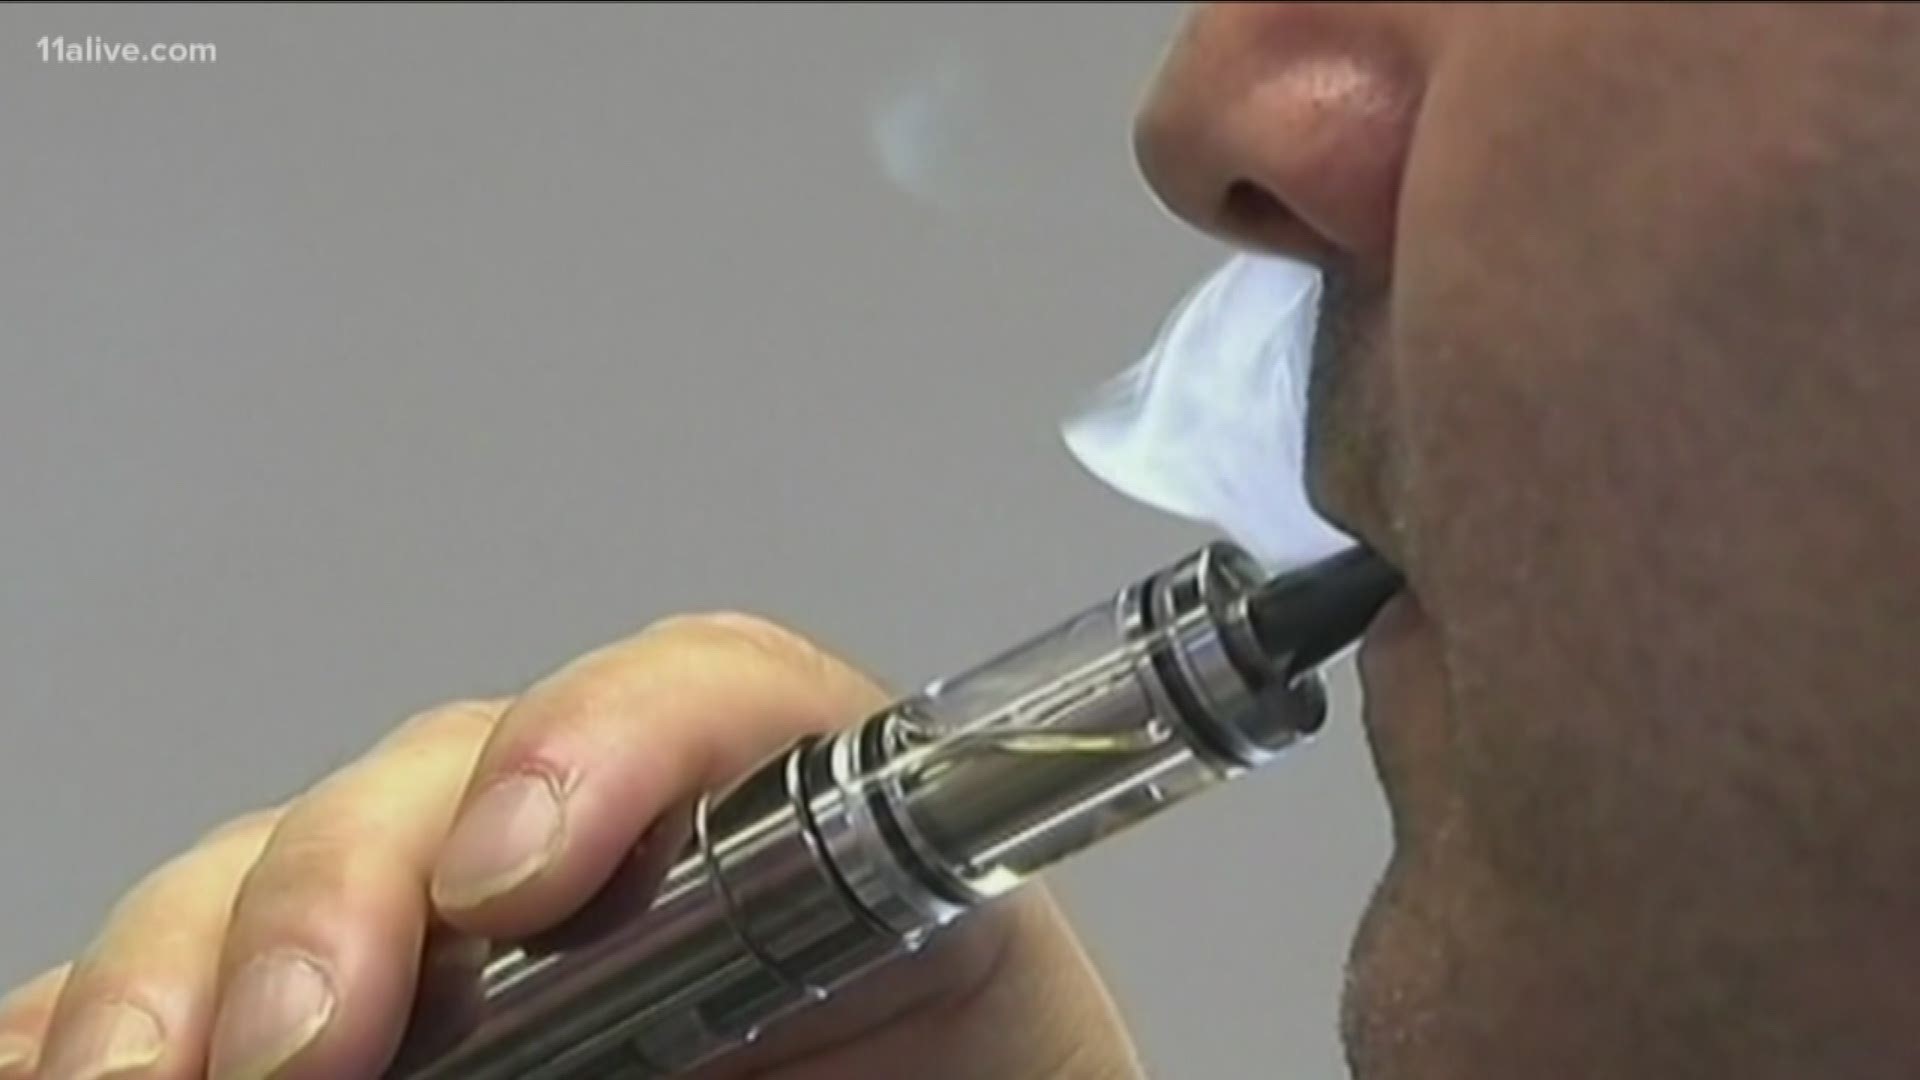 The patient had a history of "heavy" nicotine vaping, but no reported history of vaping THC.